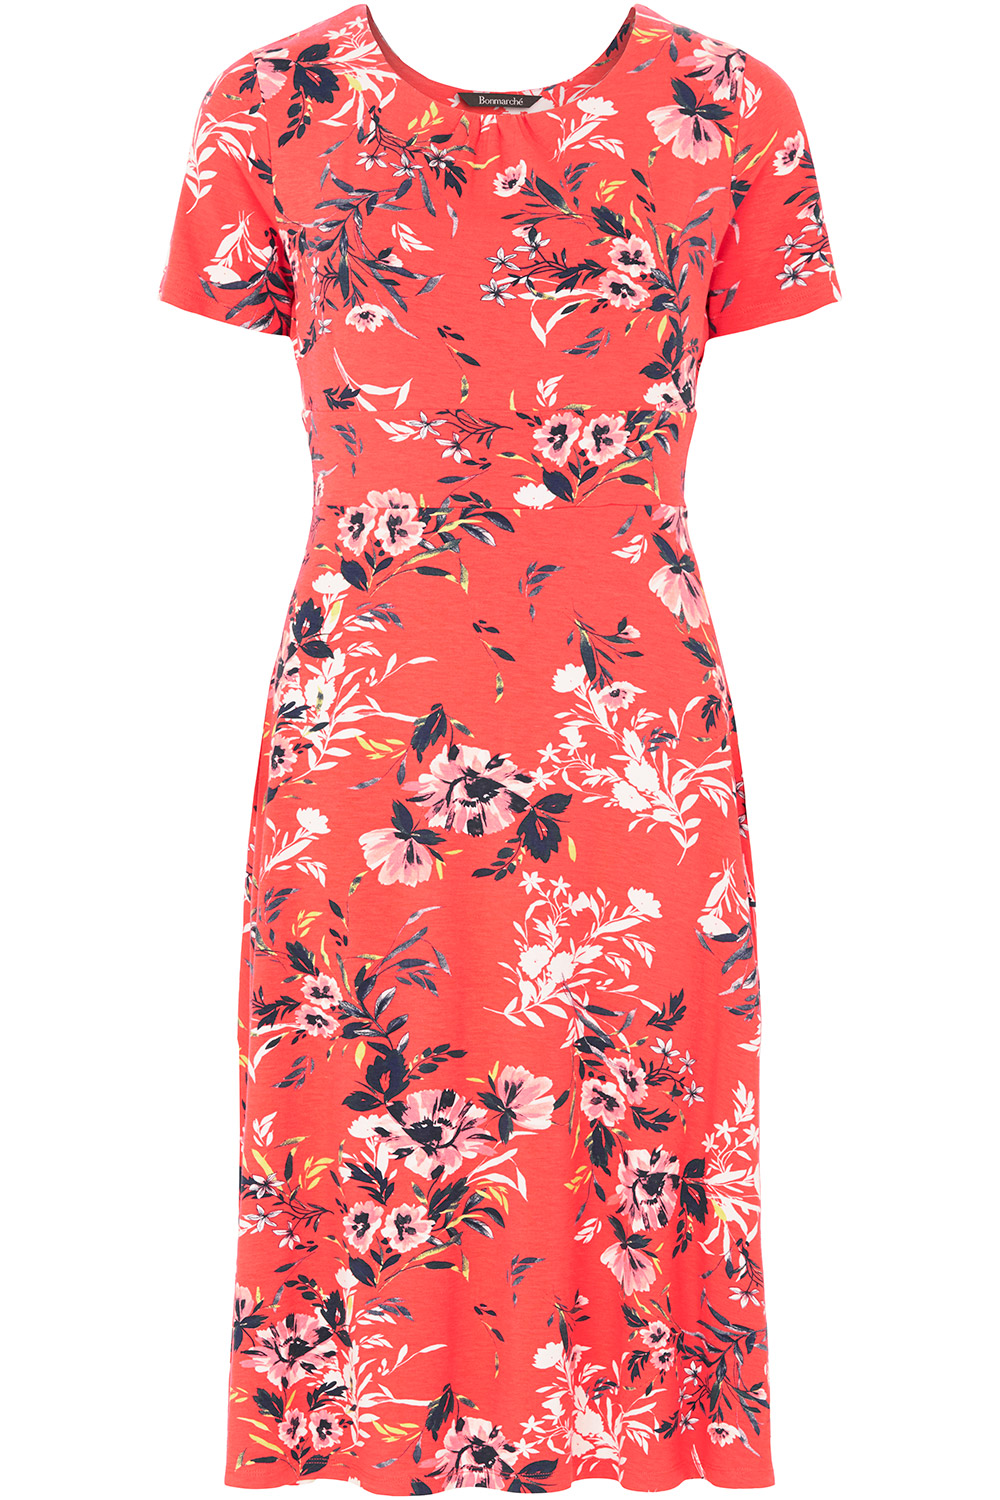 2 in 1 Floral Dress and Shrug | Home delivery | Bonmarché